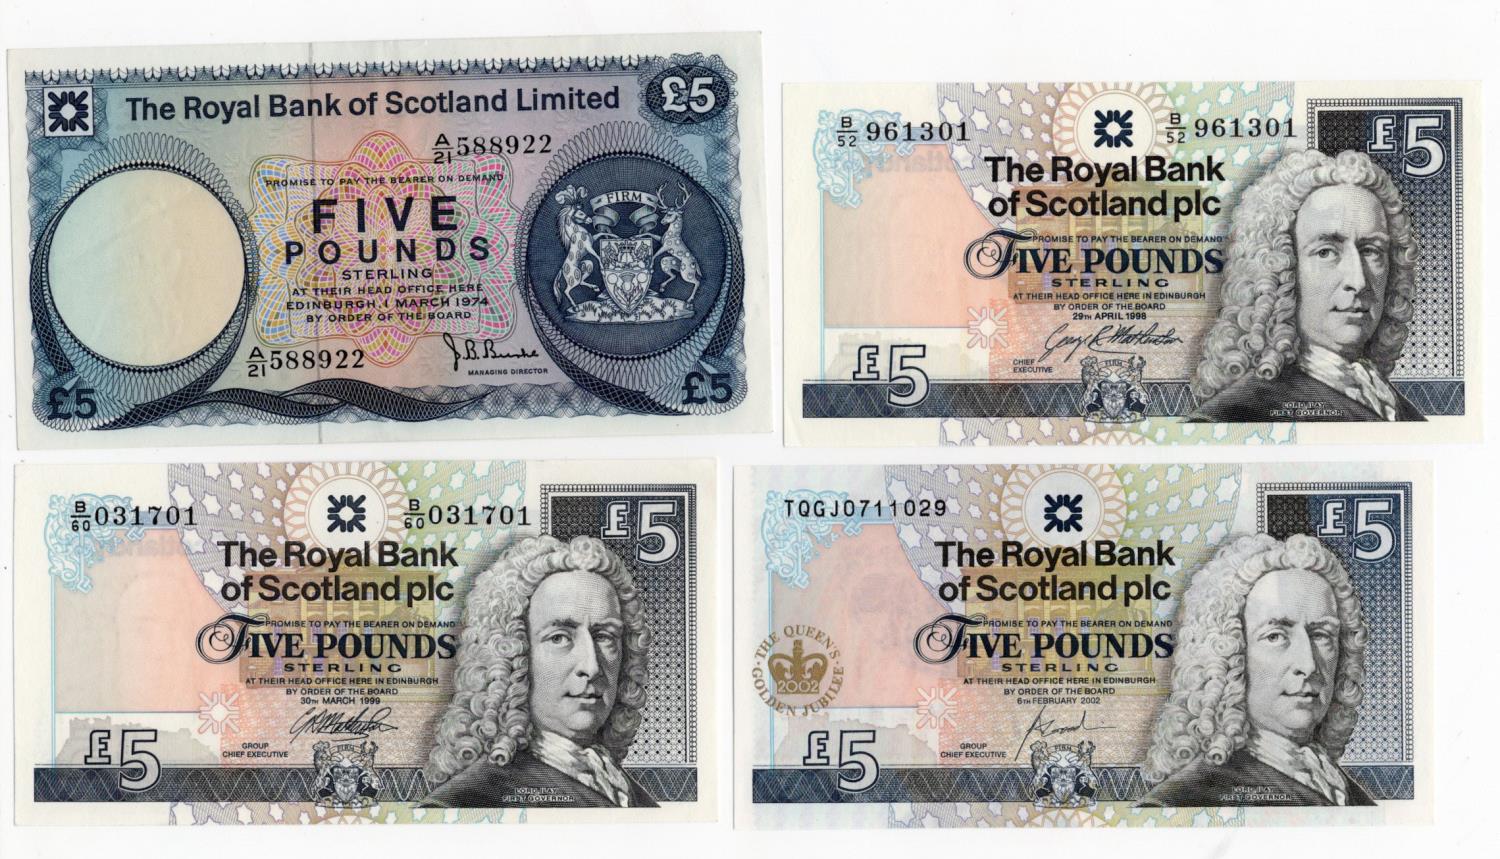 Scotland, Royal Bank of Scotland Limited (4), 5 Pounds dated 1st March 1974 serial A/21 588922 (